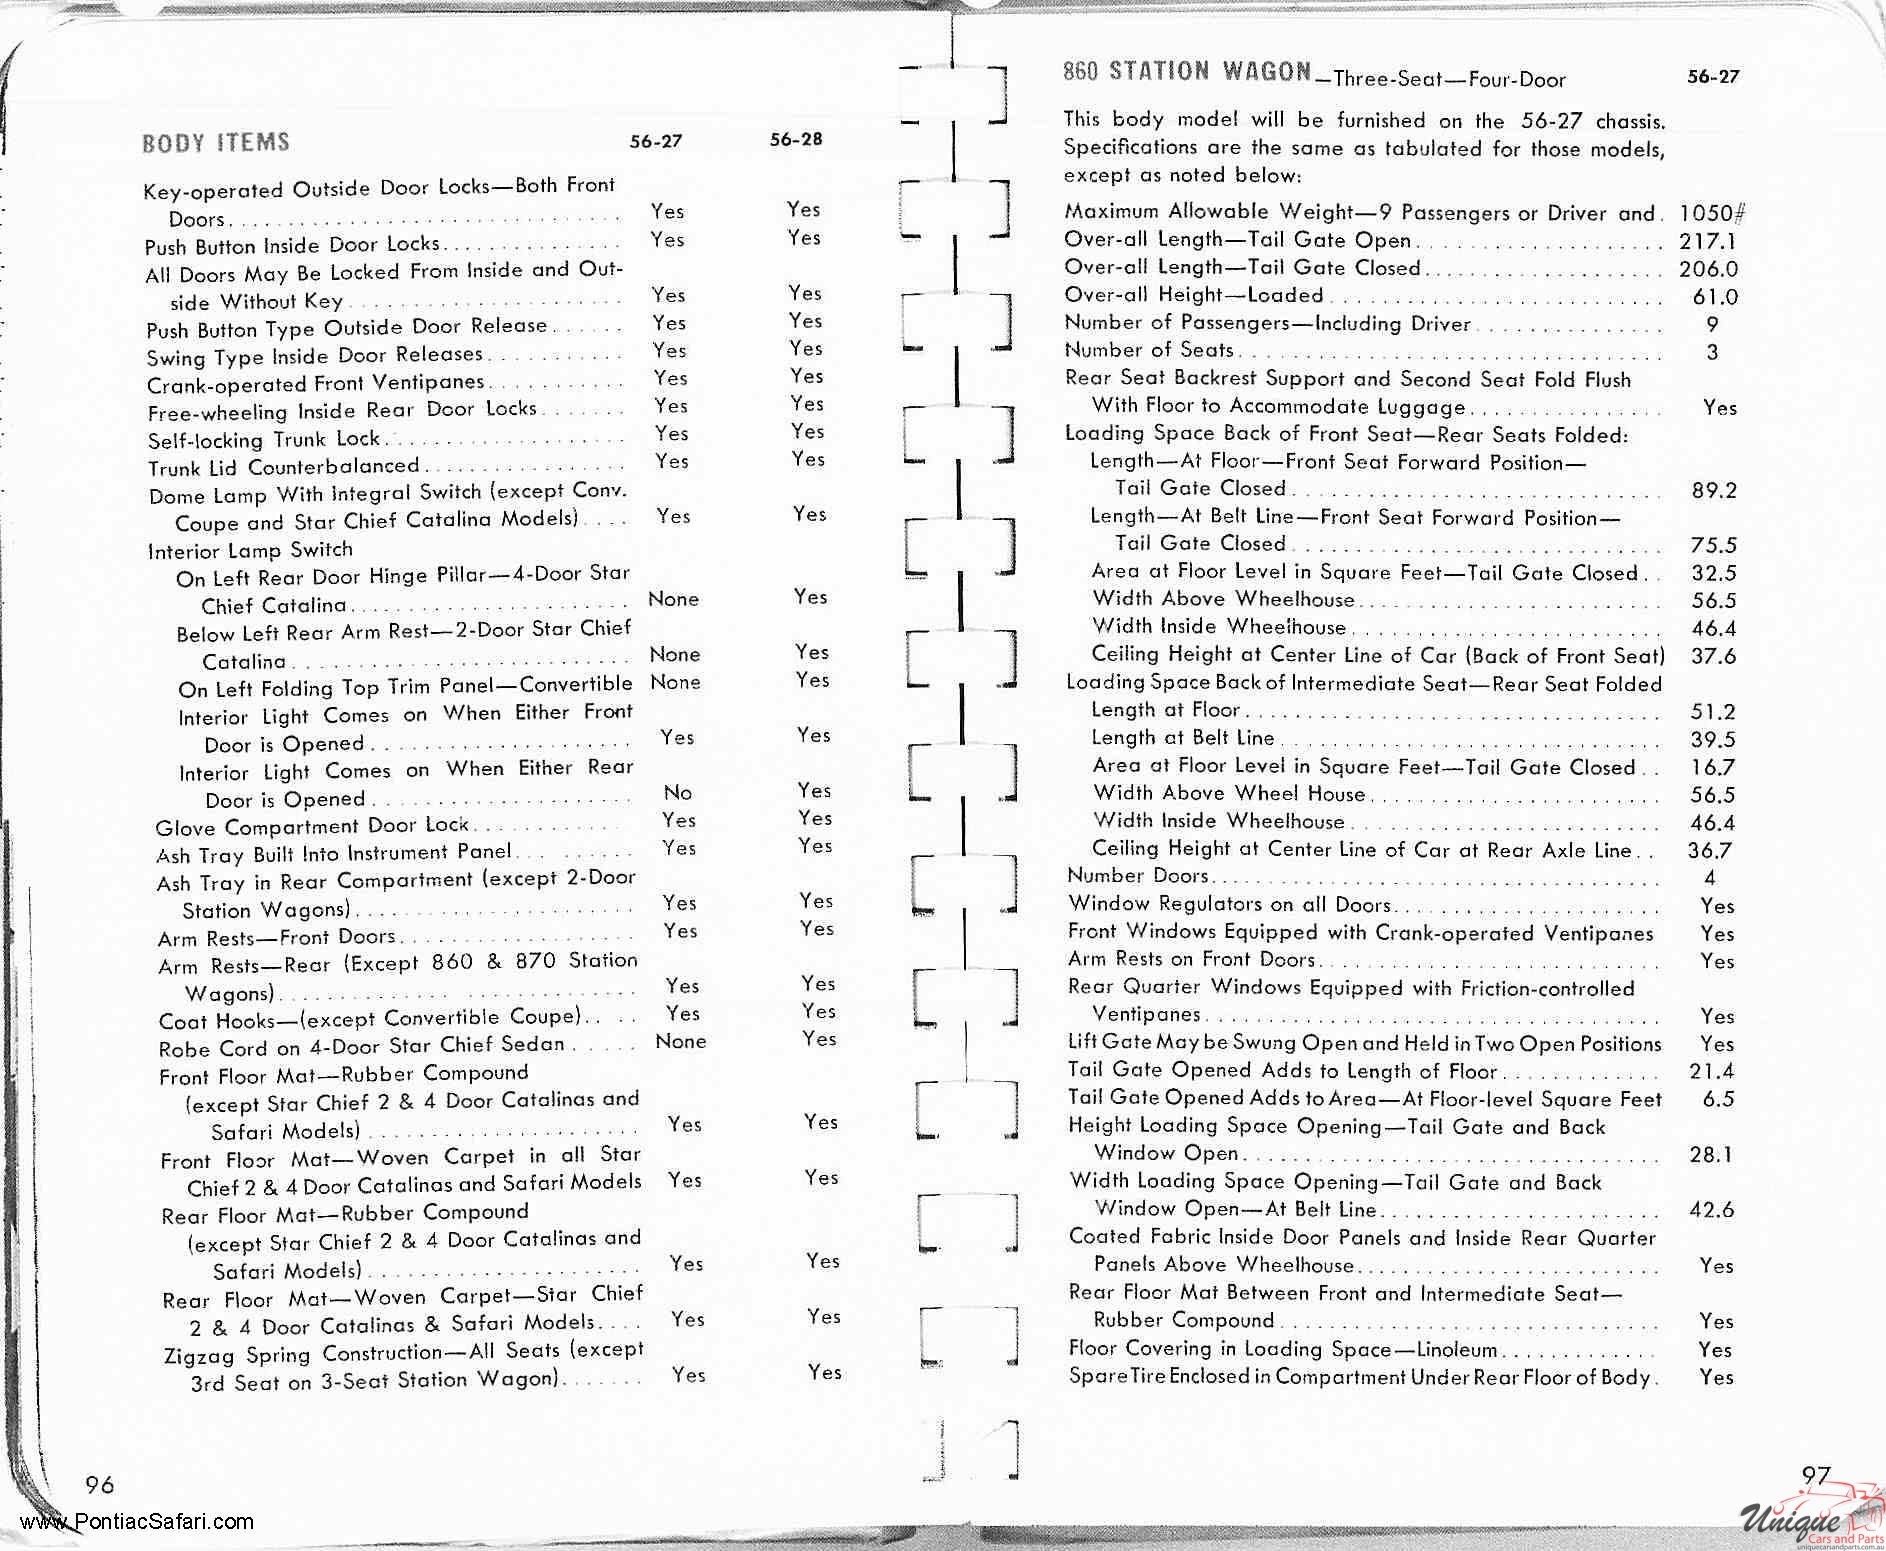 1956 Pontiac Facts Book Page 63